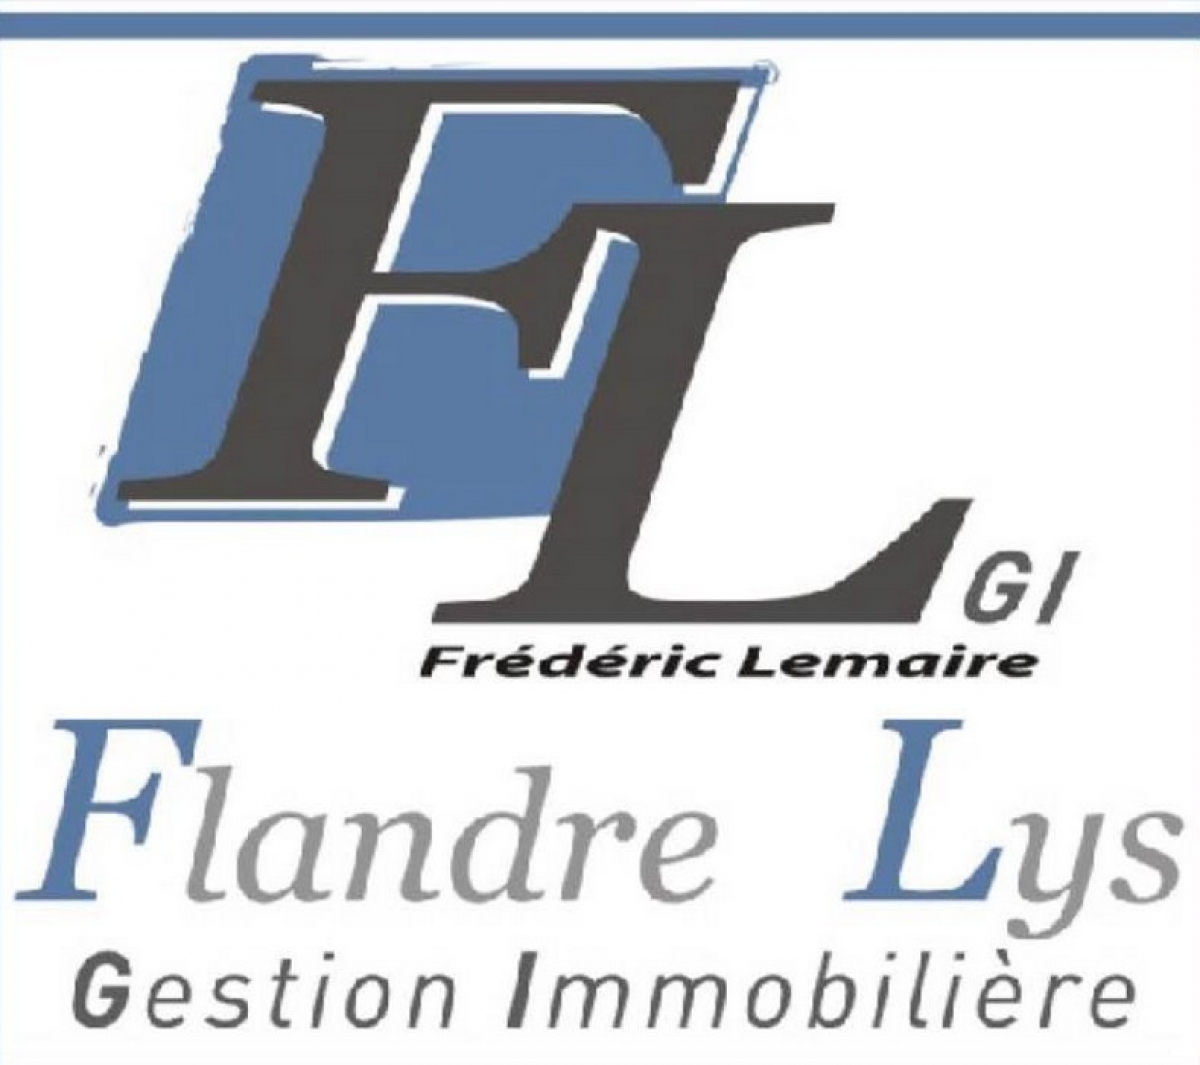 FLANDRE LYS GESTION IMMOBILI?RE